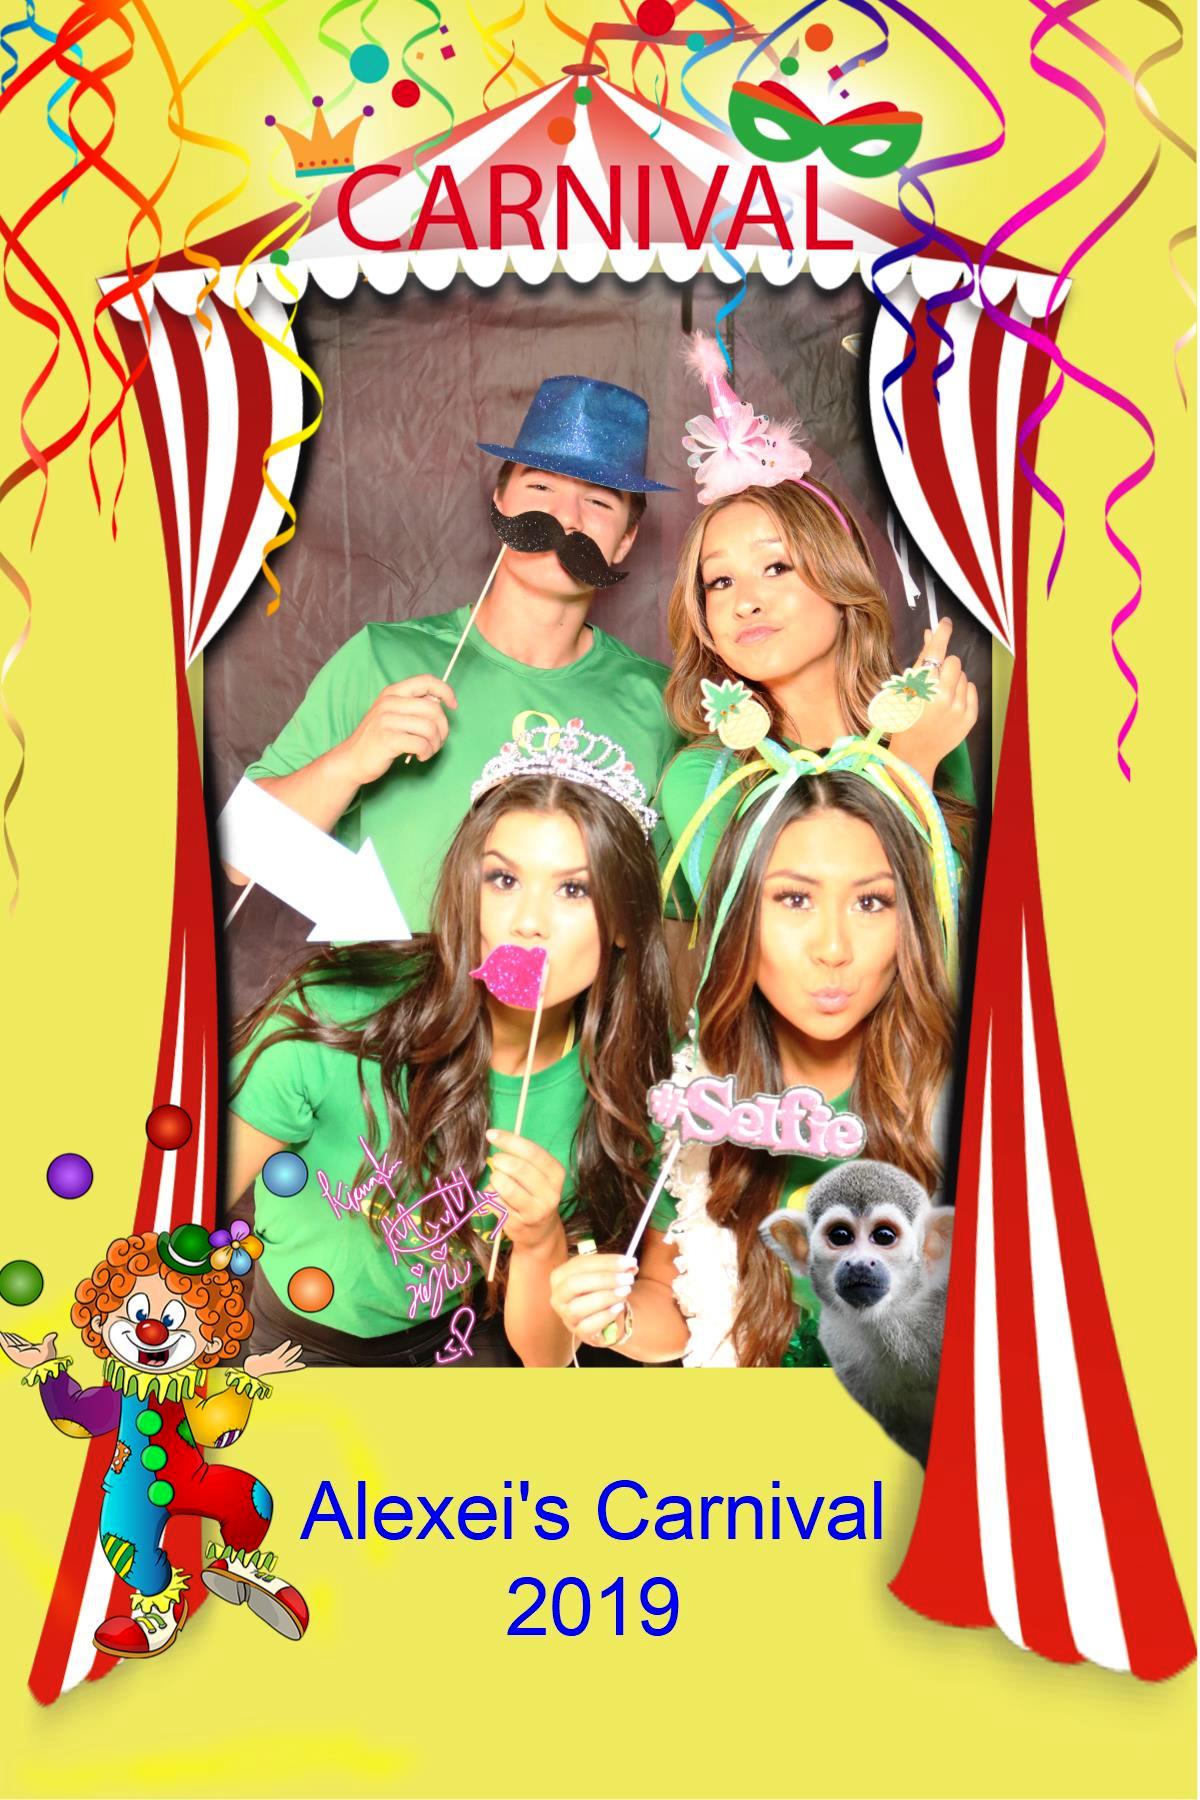 Party, magic mirror photo booth, events